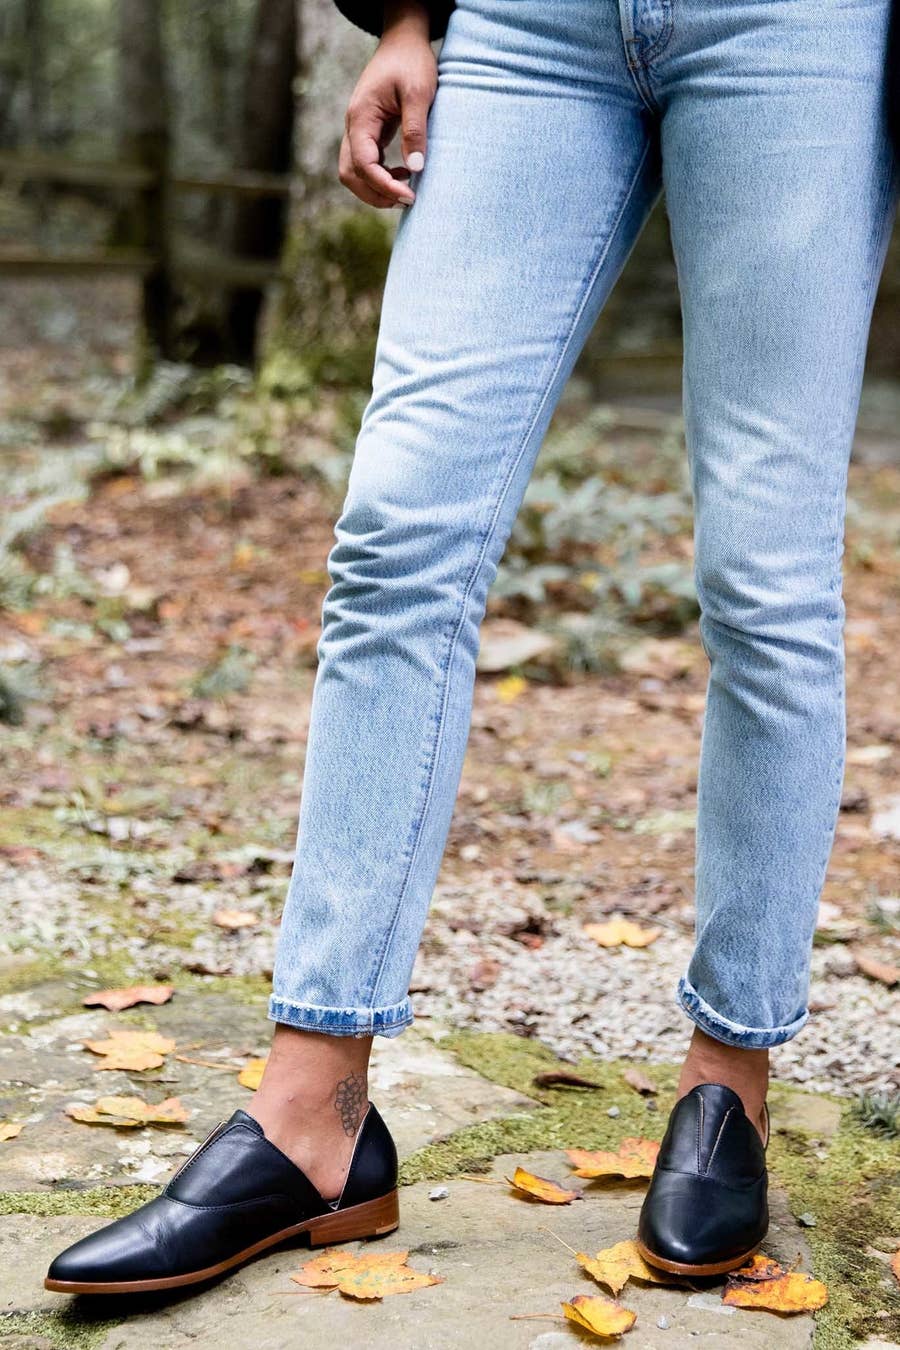 28 Comfy Fall Shoes You Can Walk Miles In